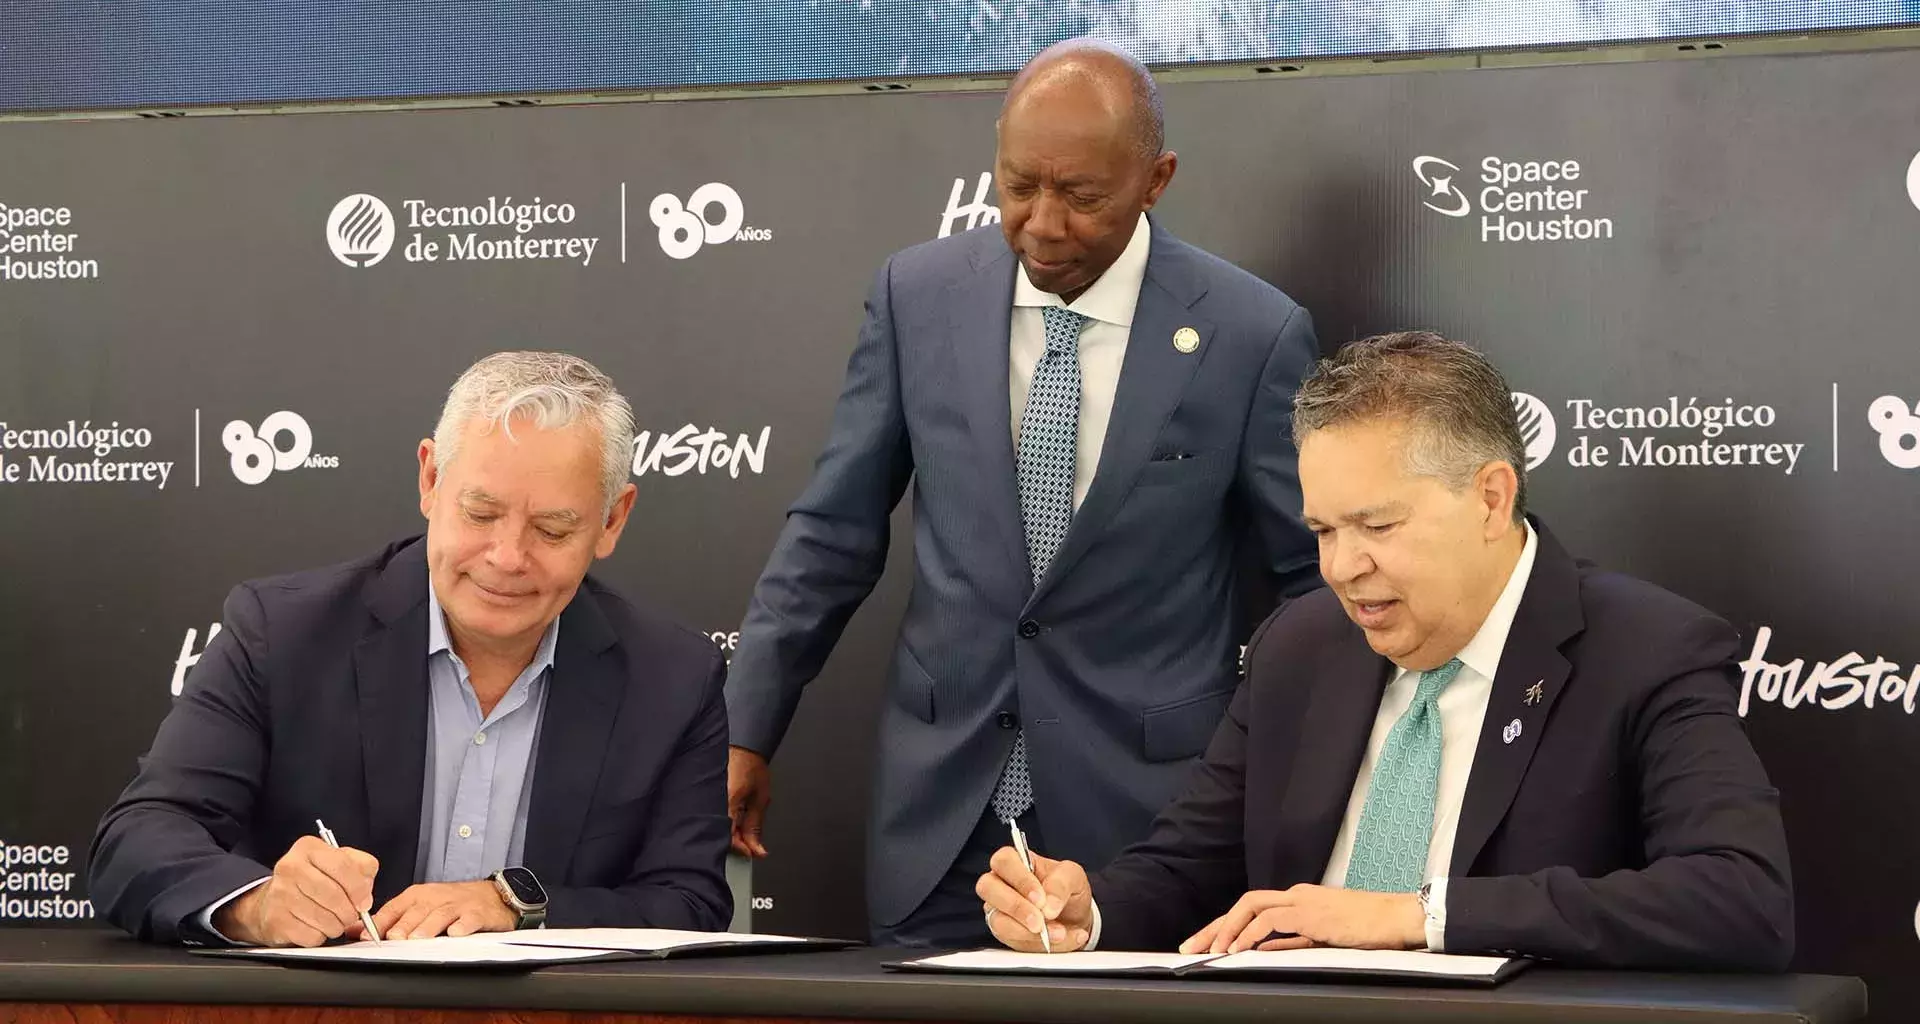 Science and space! Tec and Space Center Houston are now partners